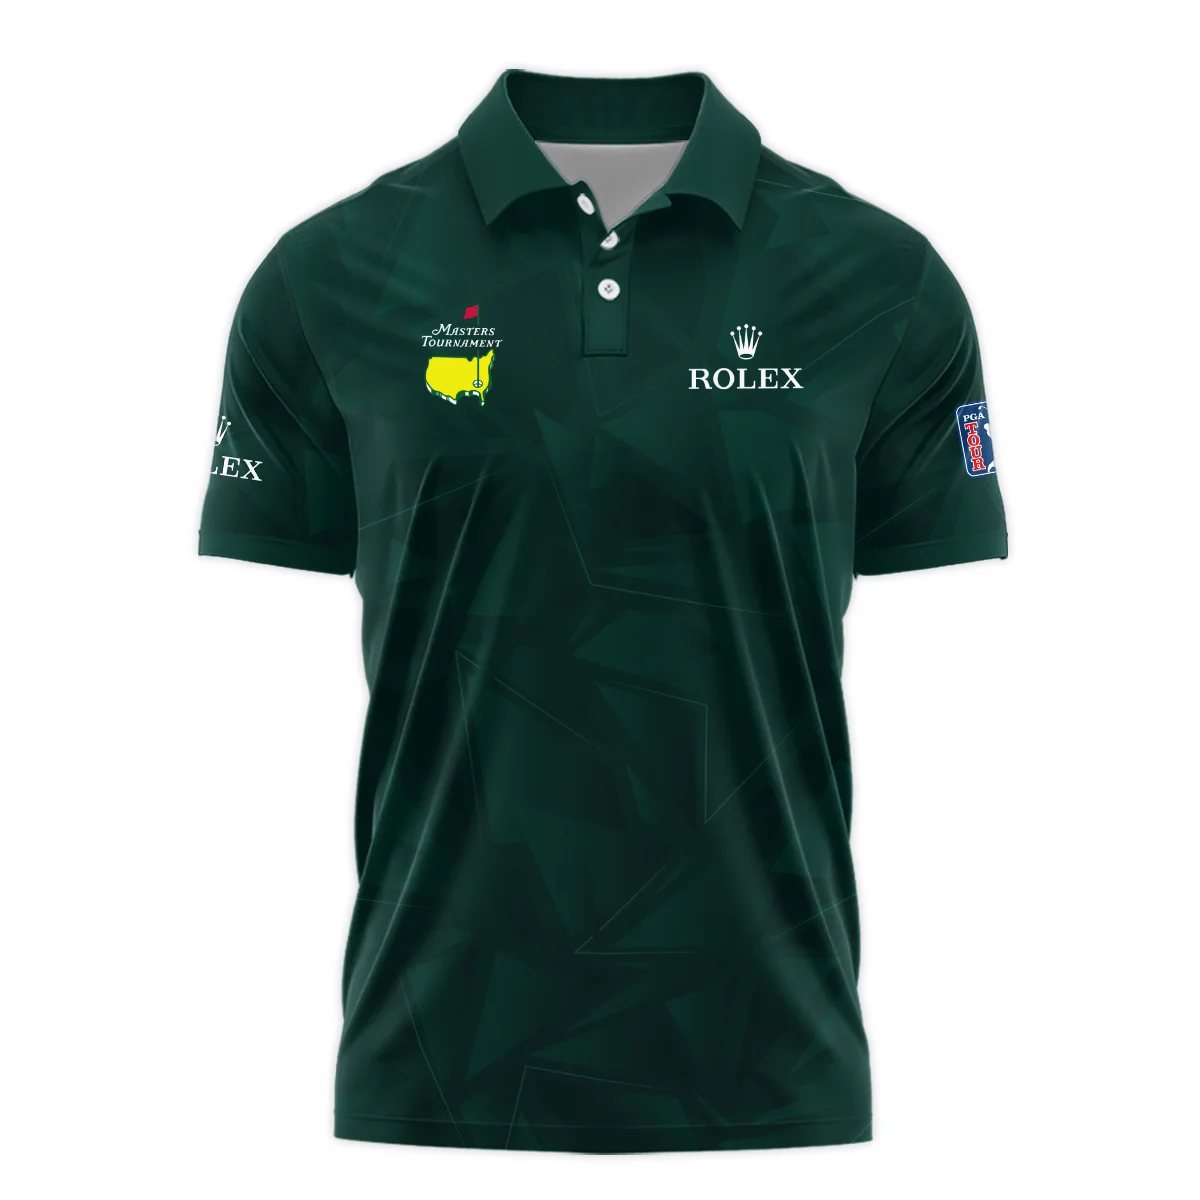 Dark Green Abstract Sport Masters Tournament Rolex Polo Shirt Style Classic Polo Shirt For Men